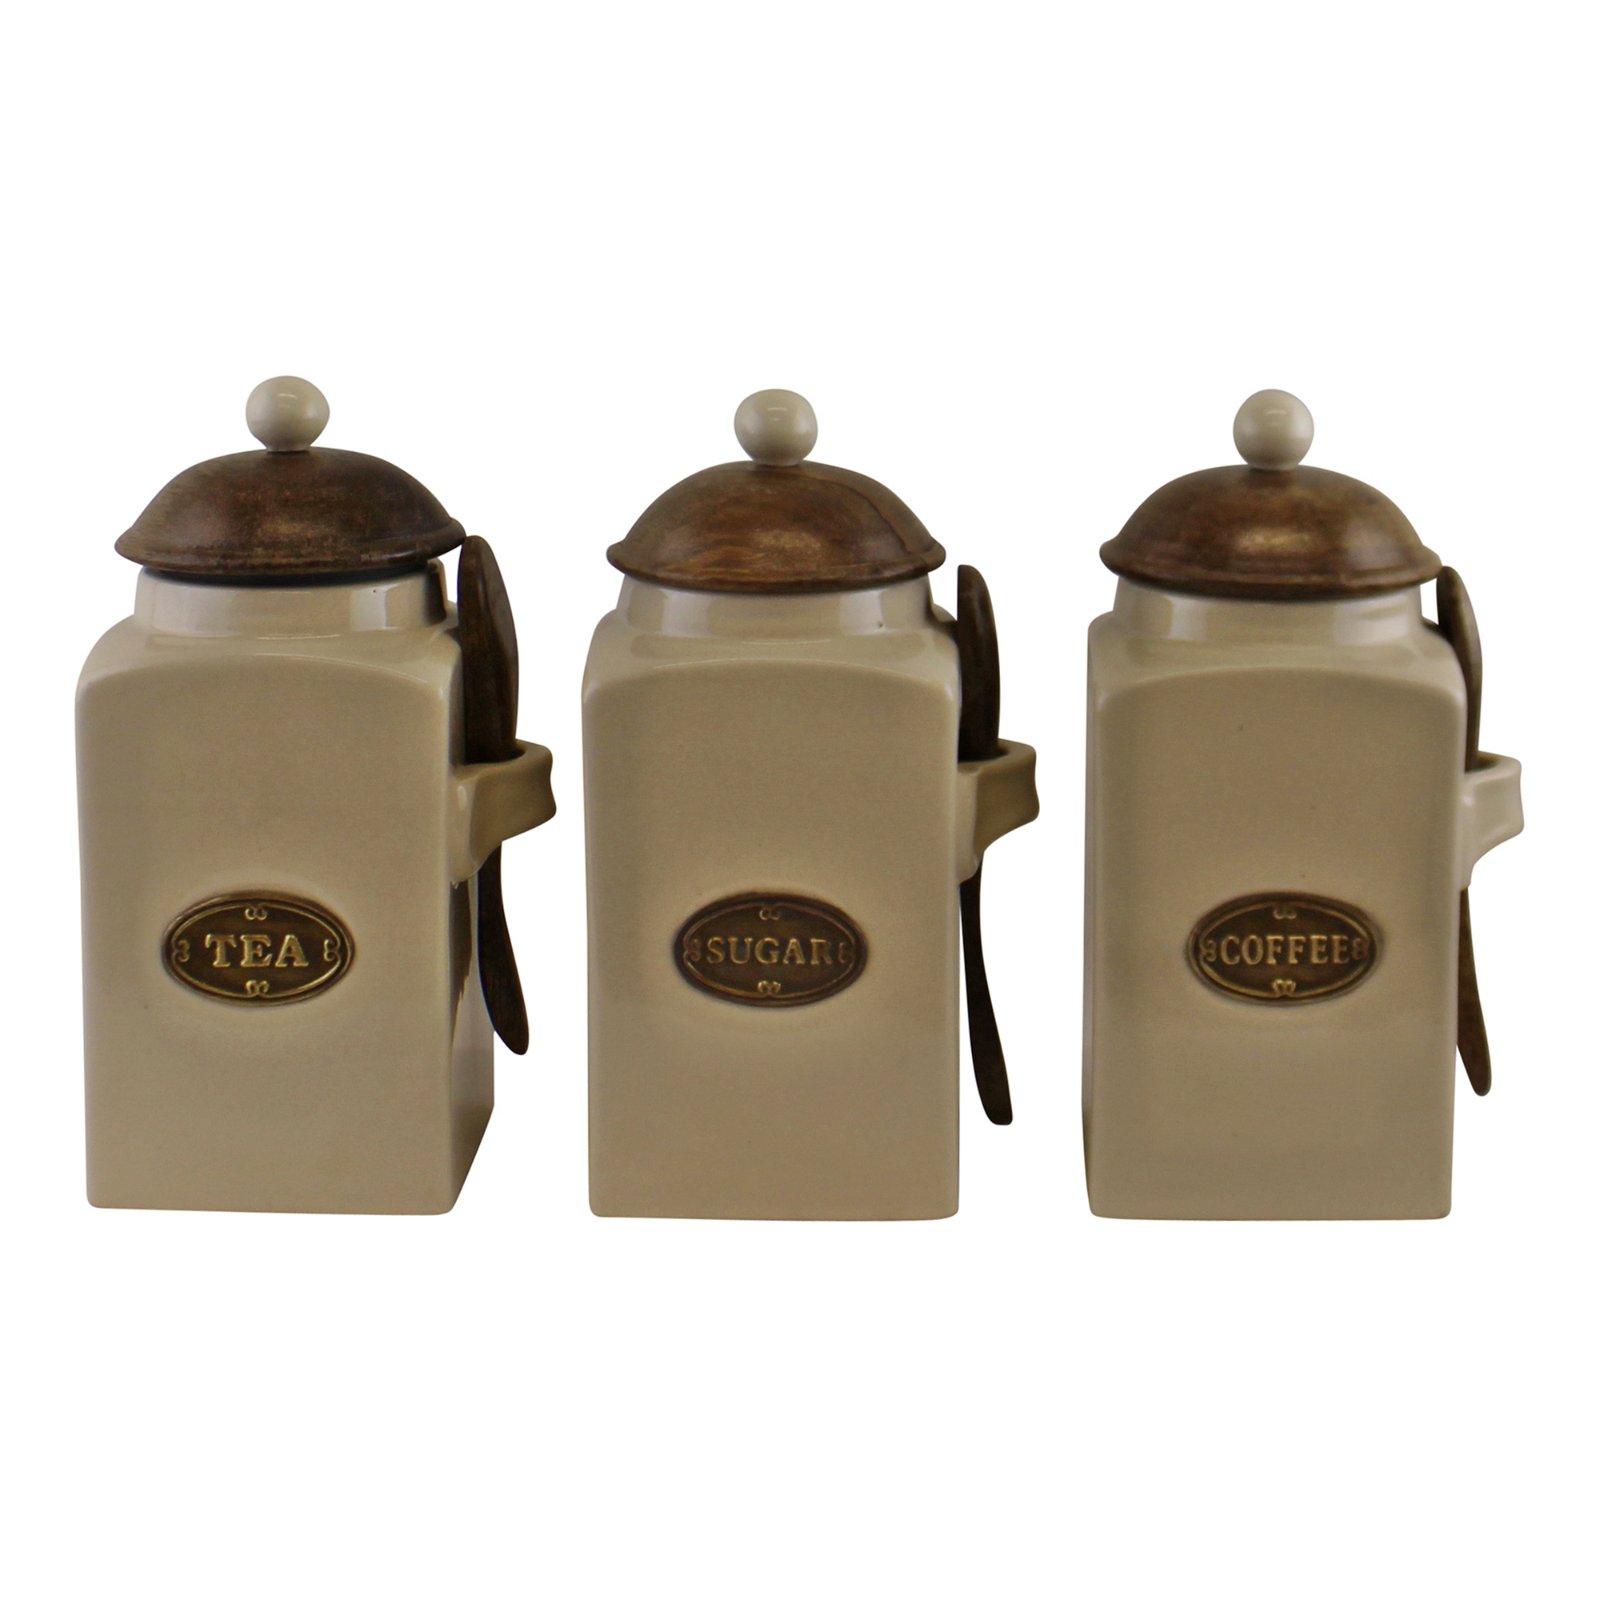 Farmhouse ceramic tea coffee sugar canisters with spoons